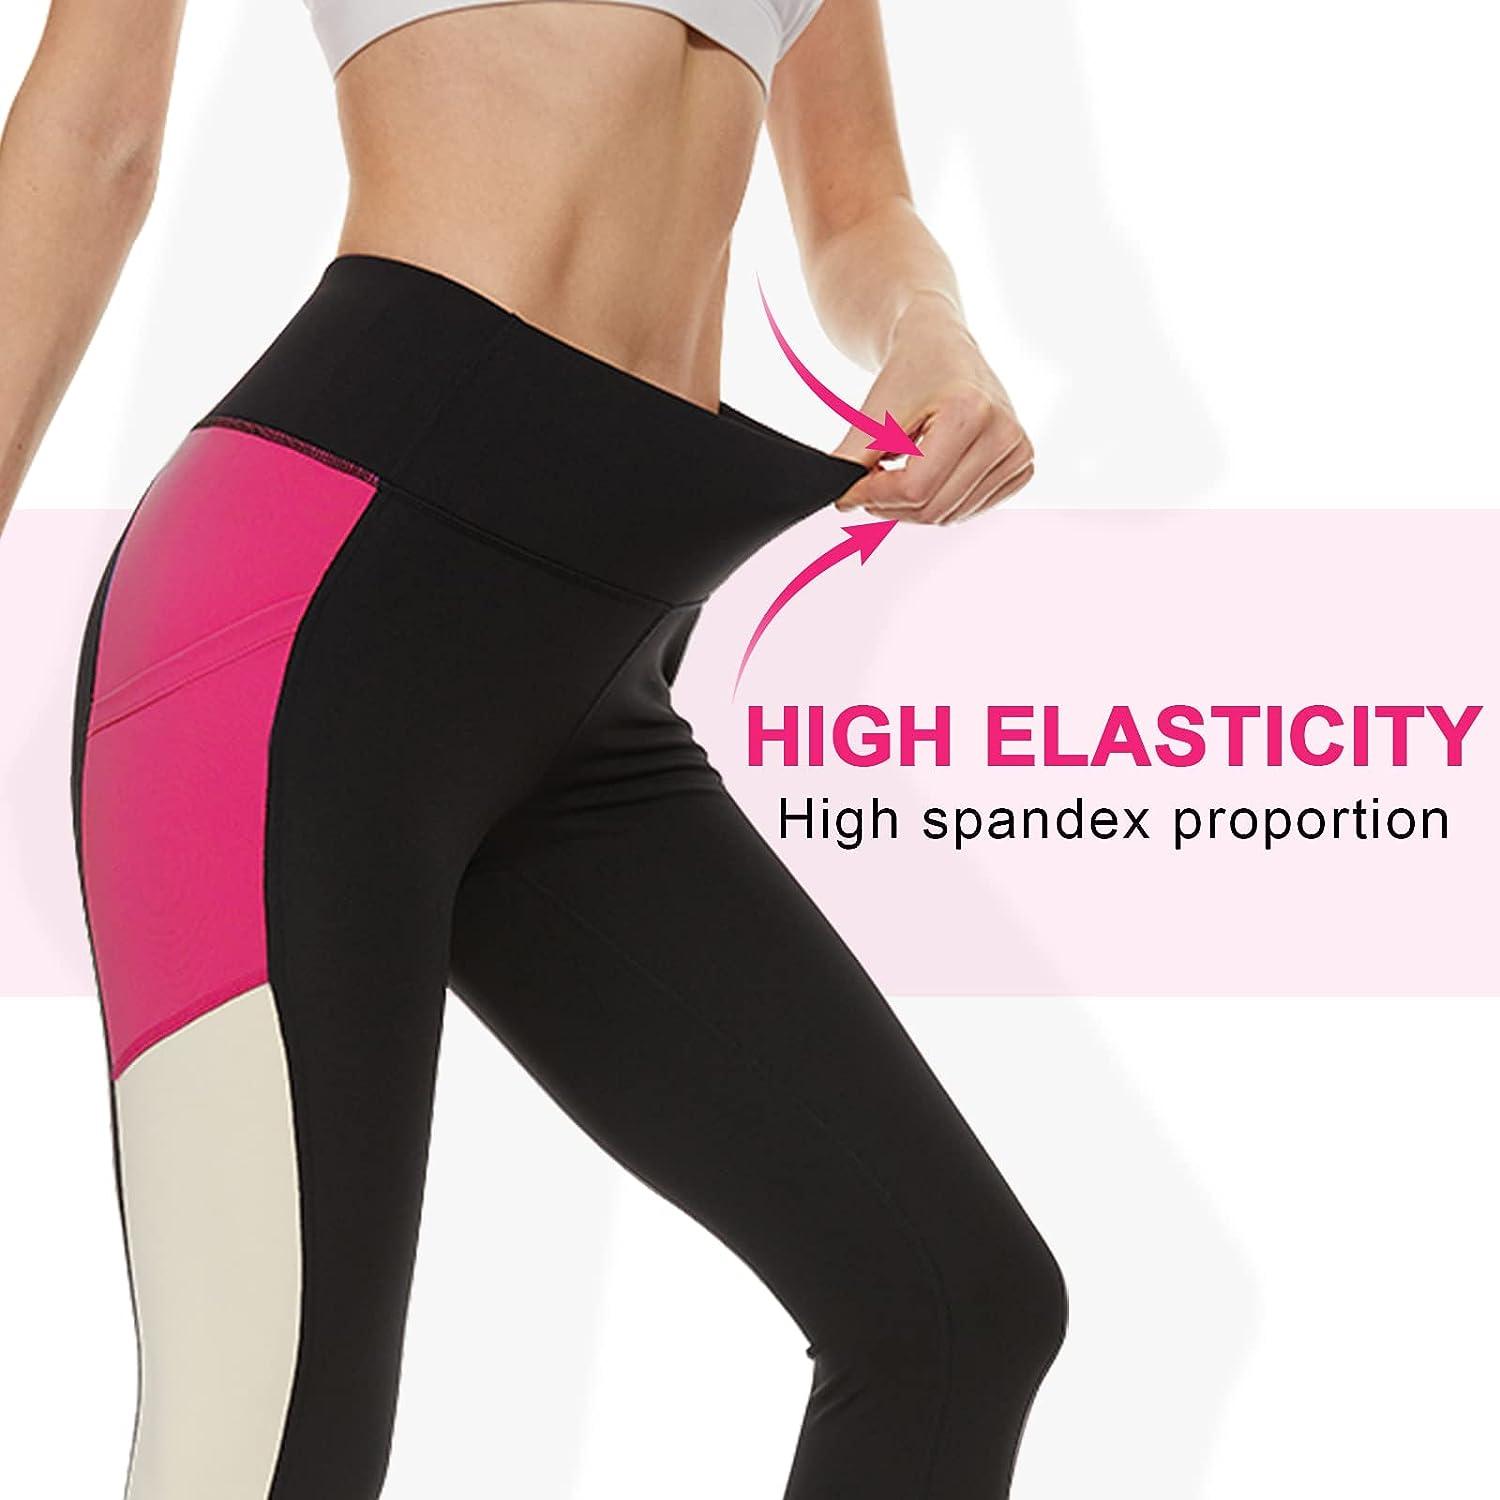 Buy Stretch Fit Yoga Pants for Women's & Tights for Women Workout